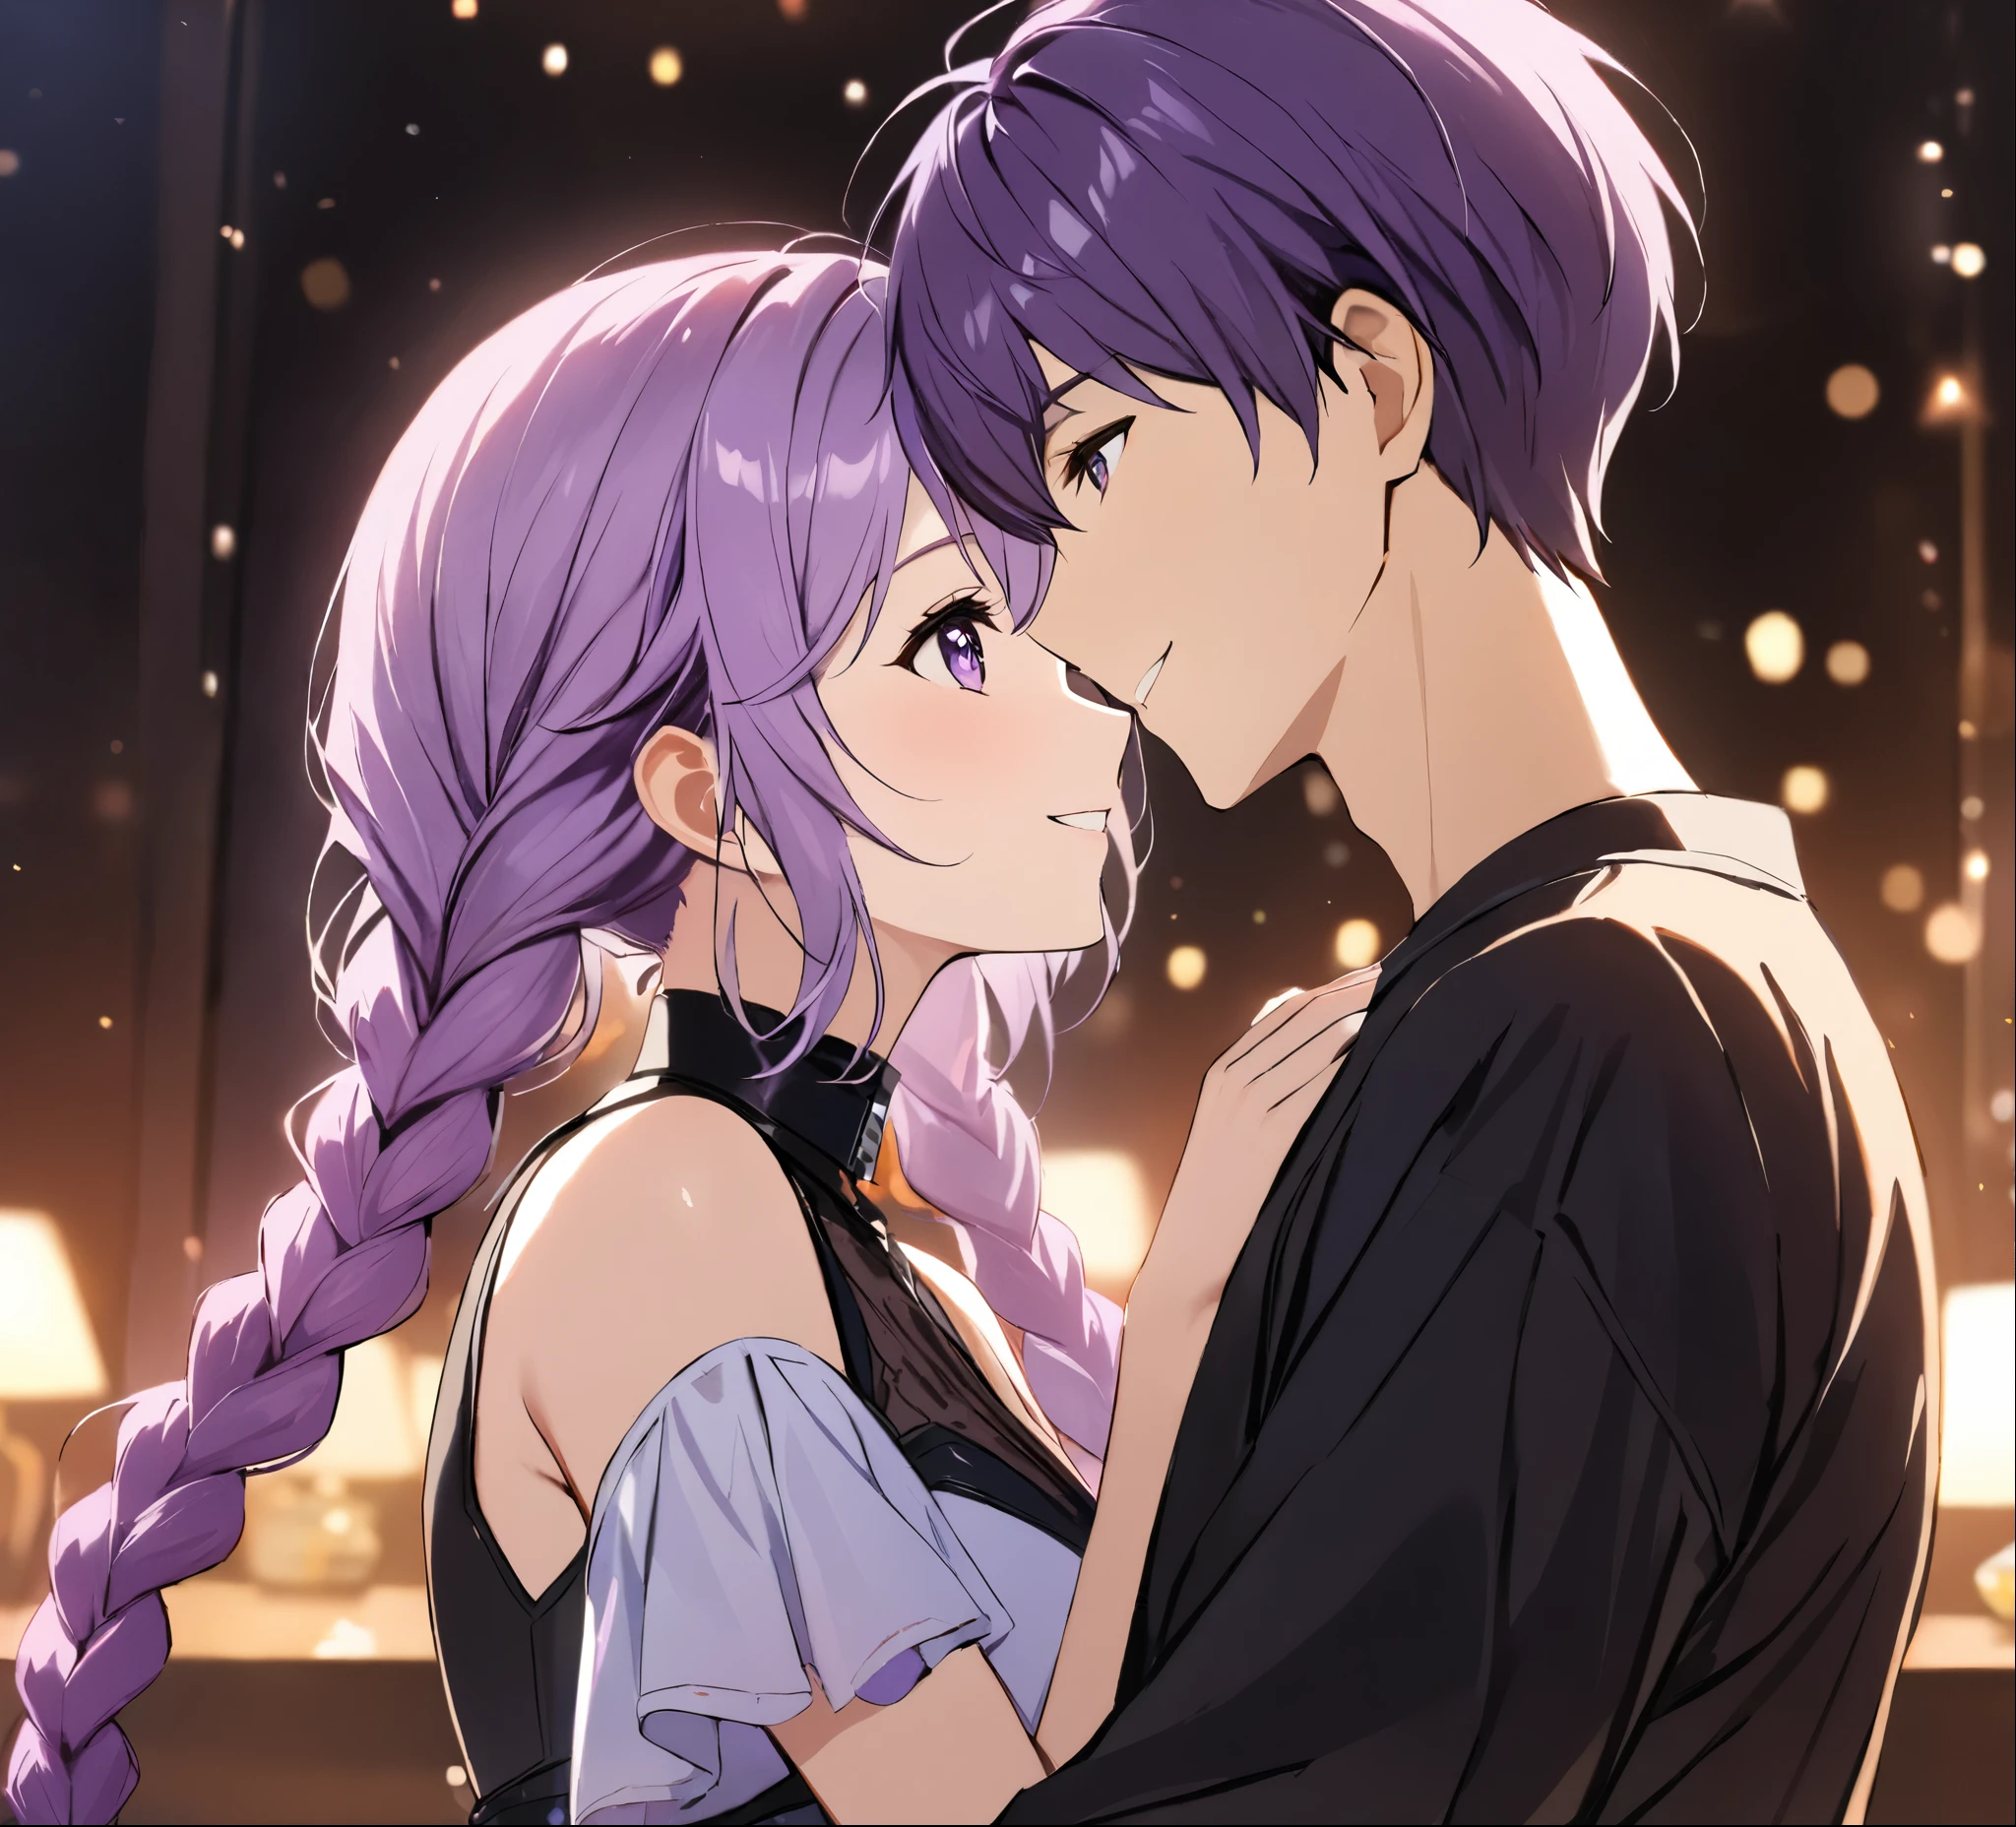 1 boy,A girl with purple and white gradient double braids,romantic couple,smiling faces facing each other,close intimacy,background blurred,high quality,artistic feel,movie-like atmosphere,luxurious lighting